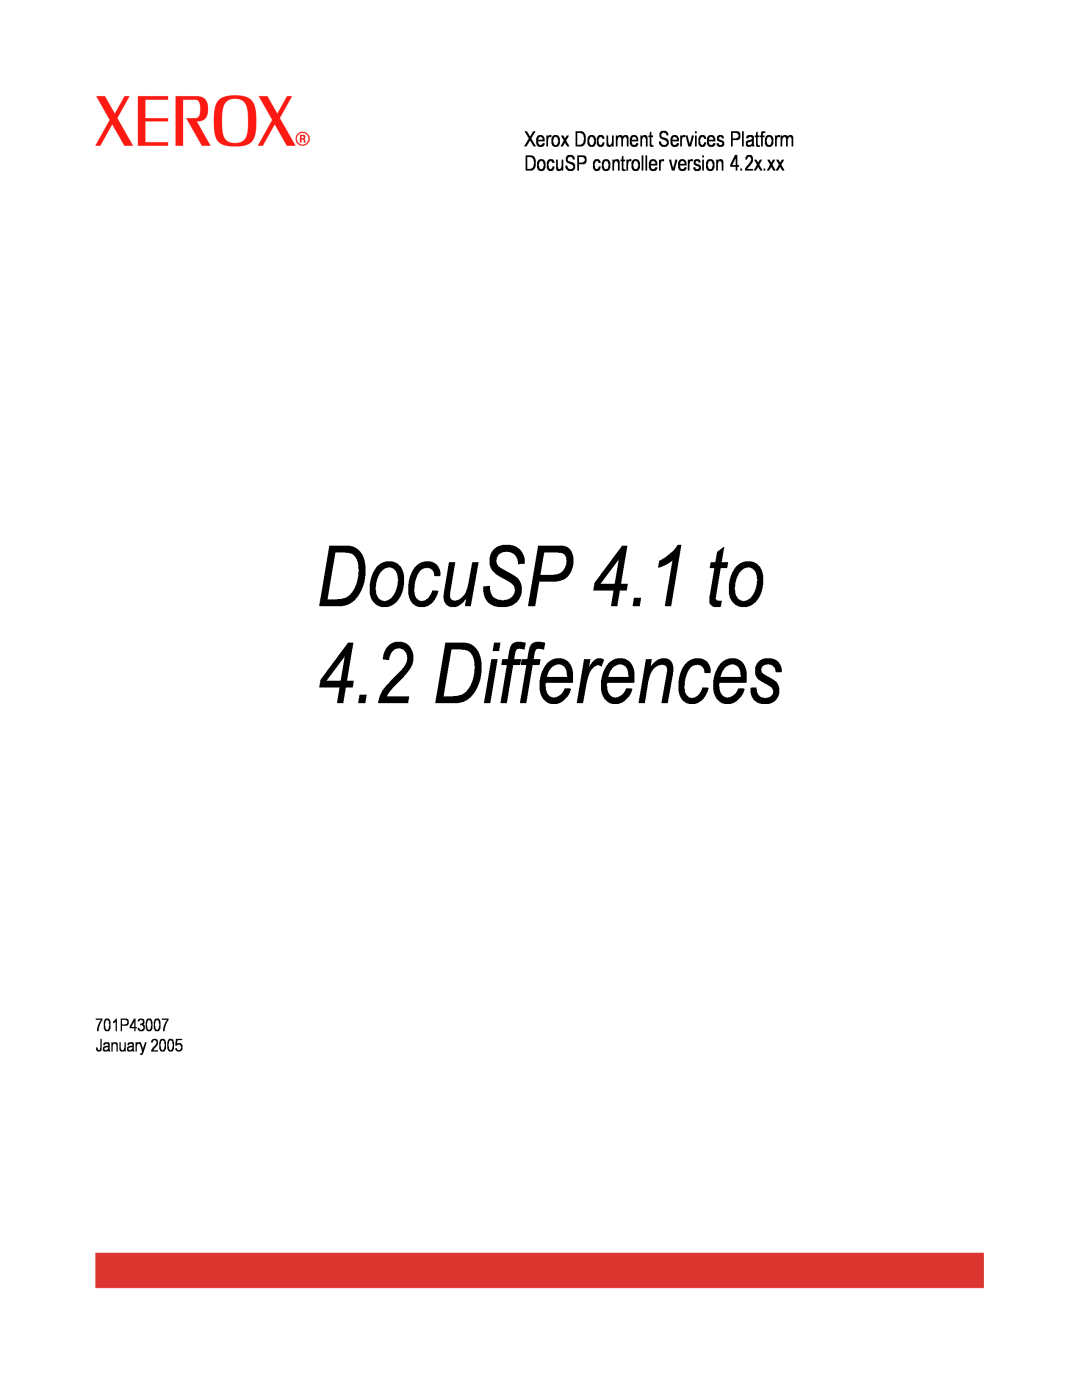 Xerox manual DocuSP 4.1 to 4.2 Differences, Xerox Document Services Platform DocuSP controller version 